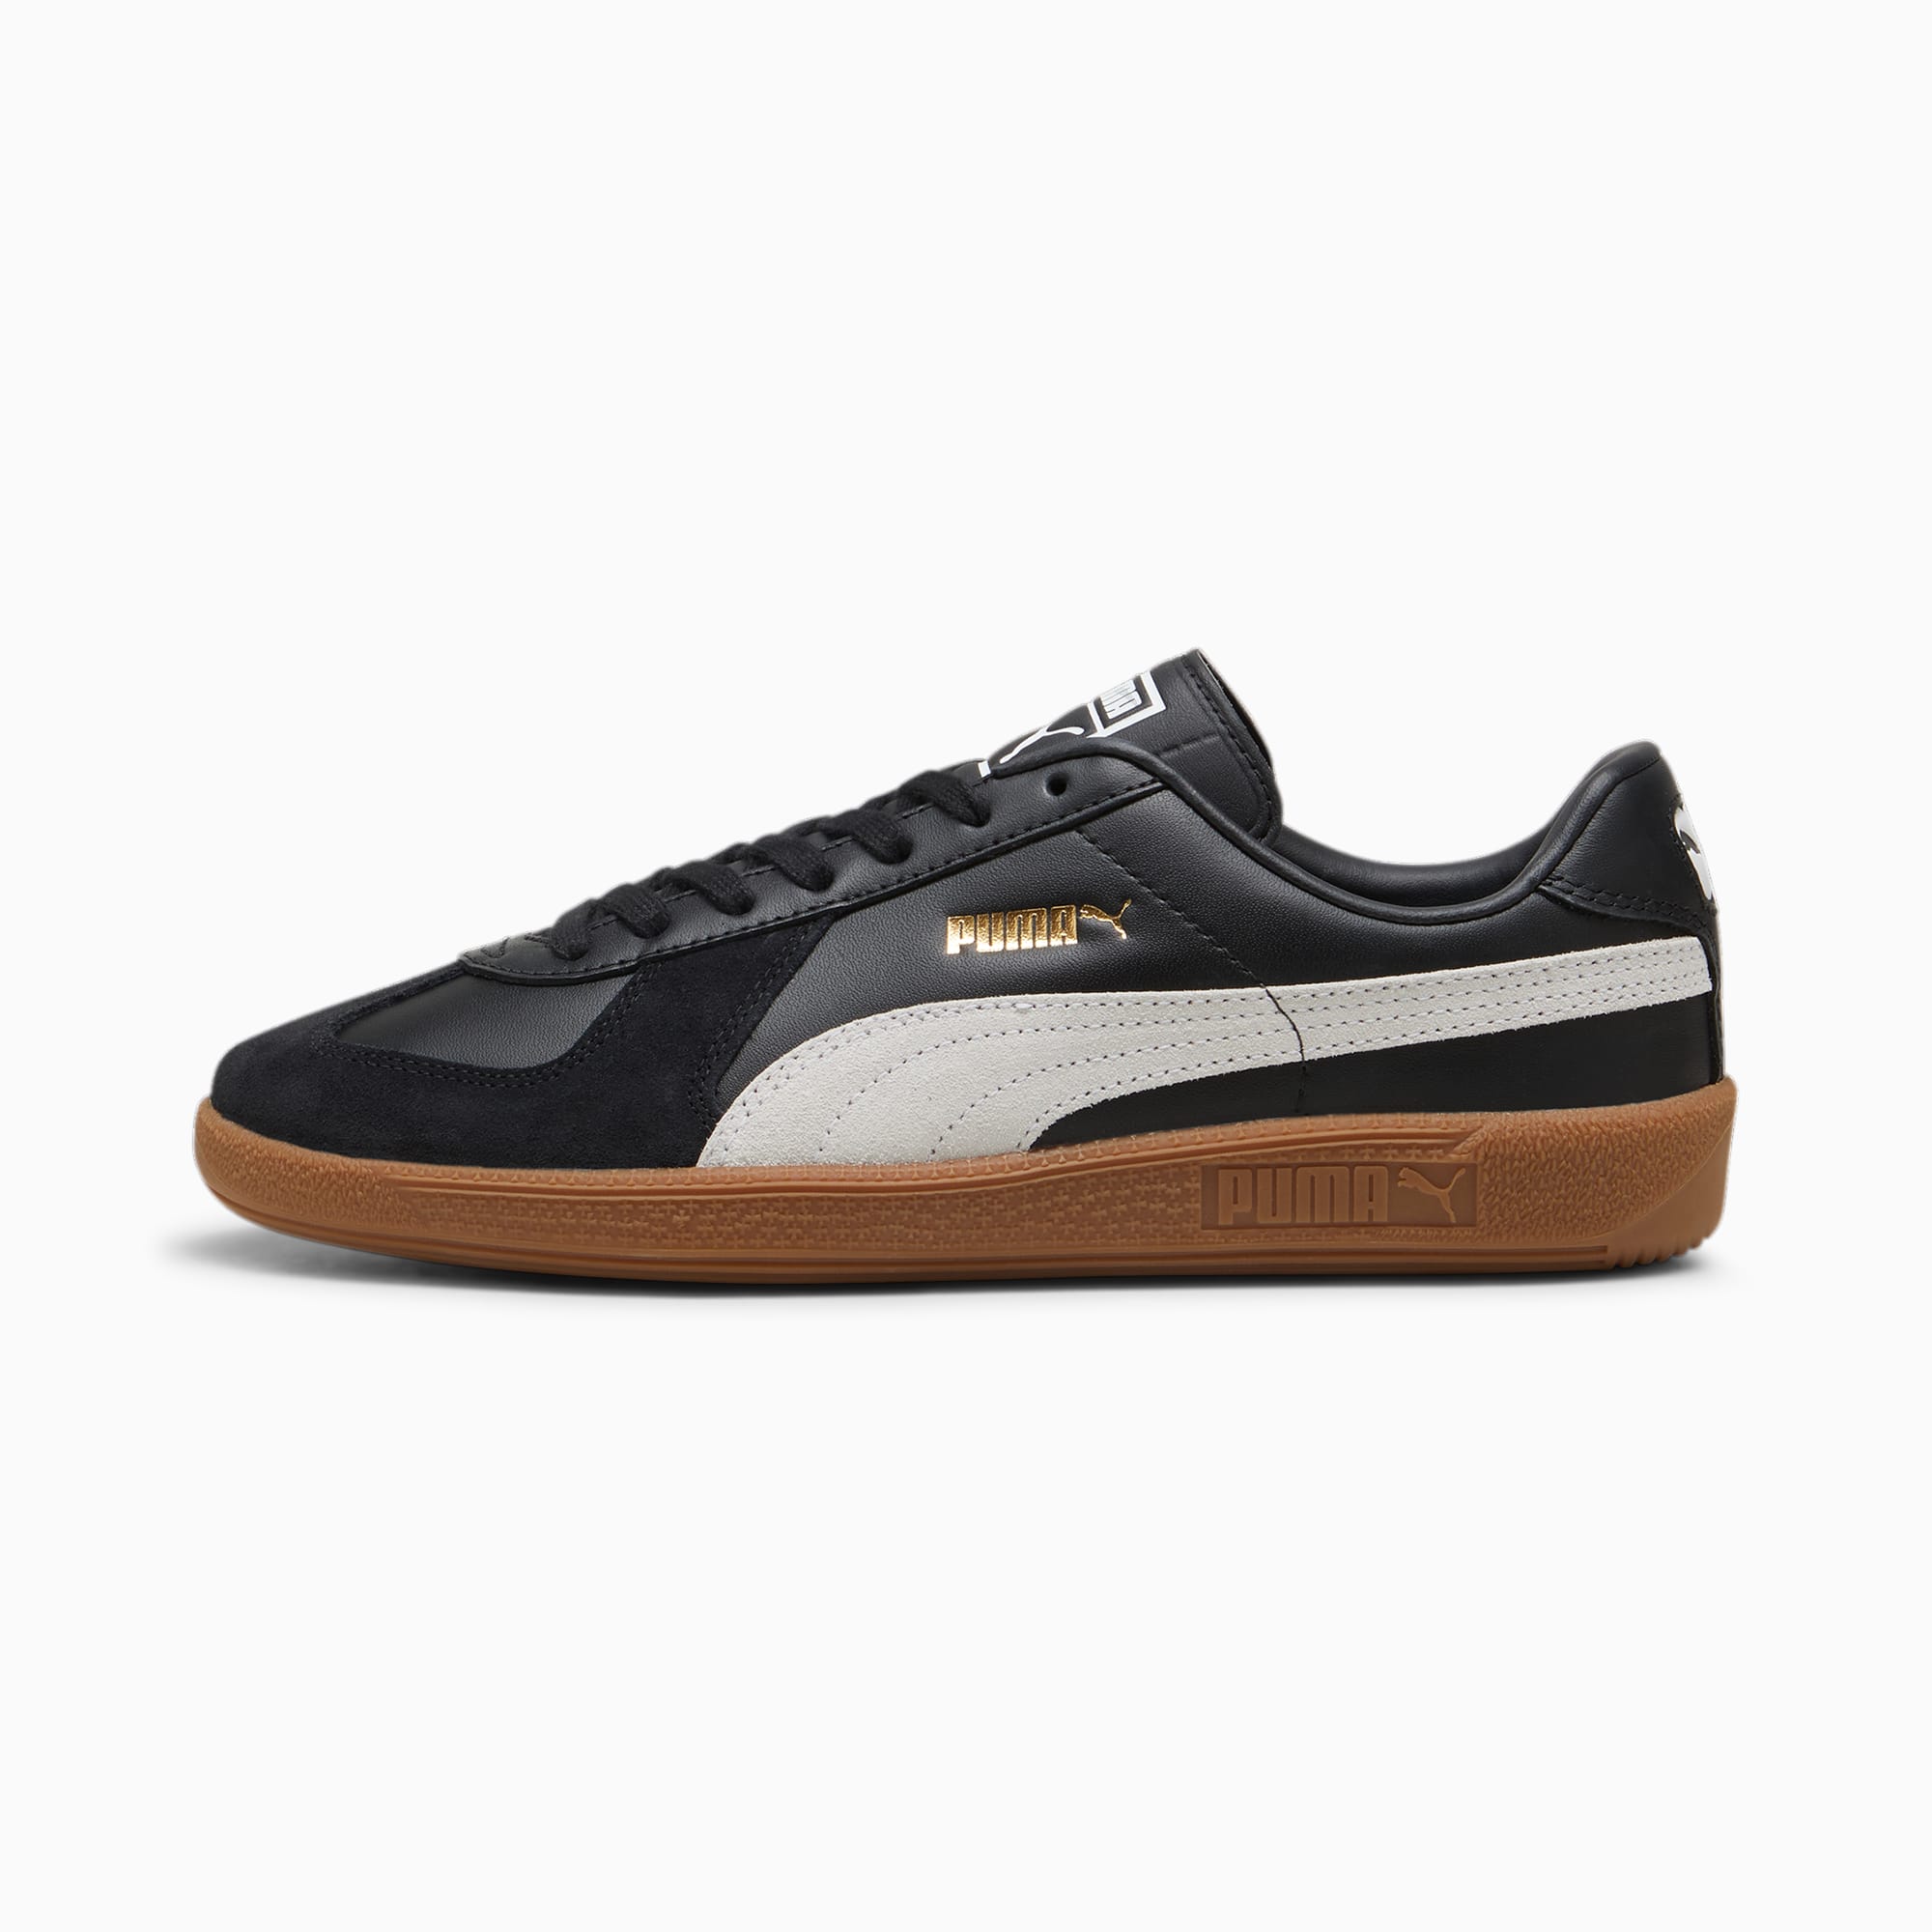 Women's PUMA Army Trainer Sneakers, Black/White/Gum, Size 36, Shoes